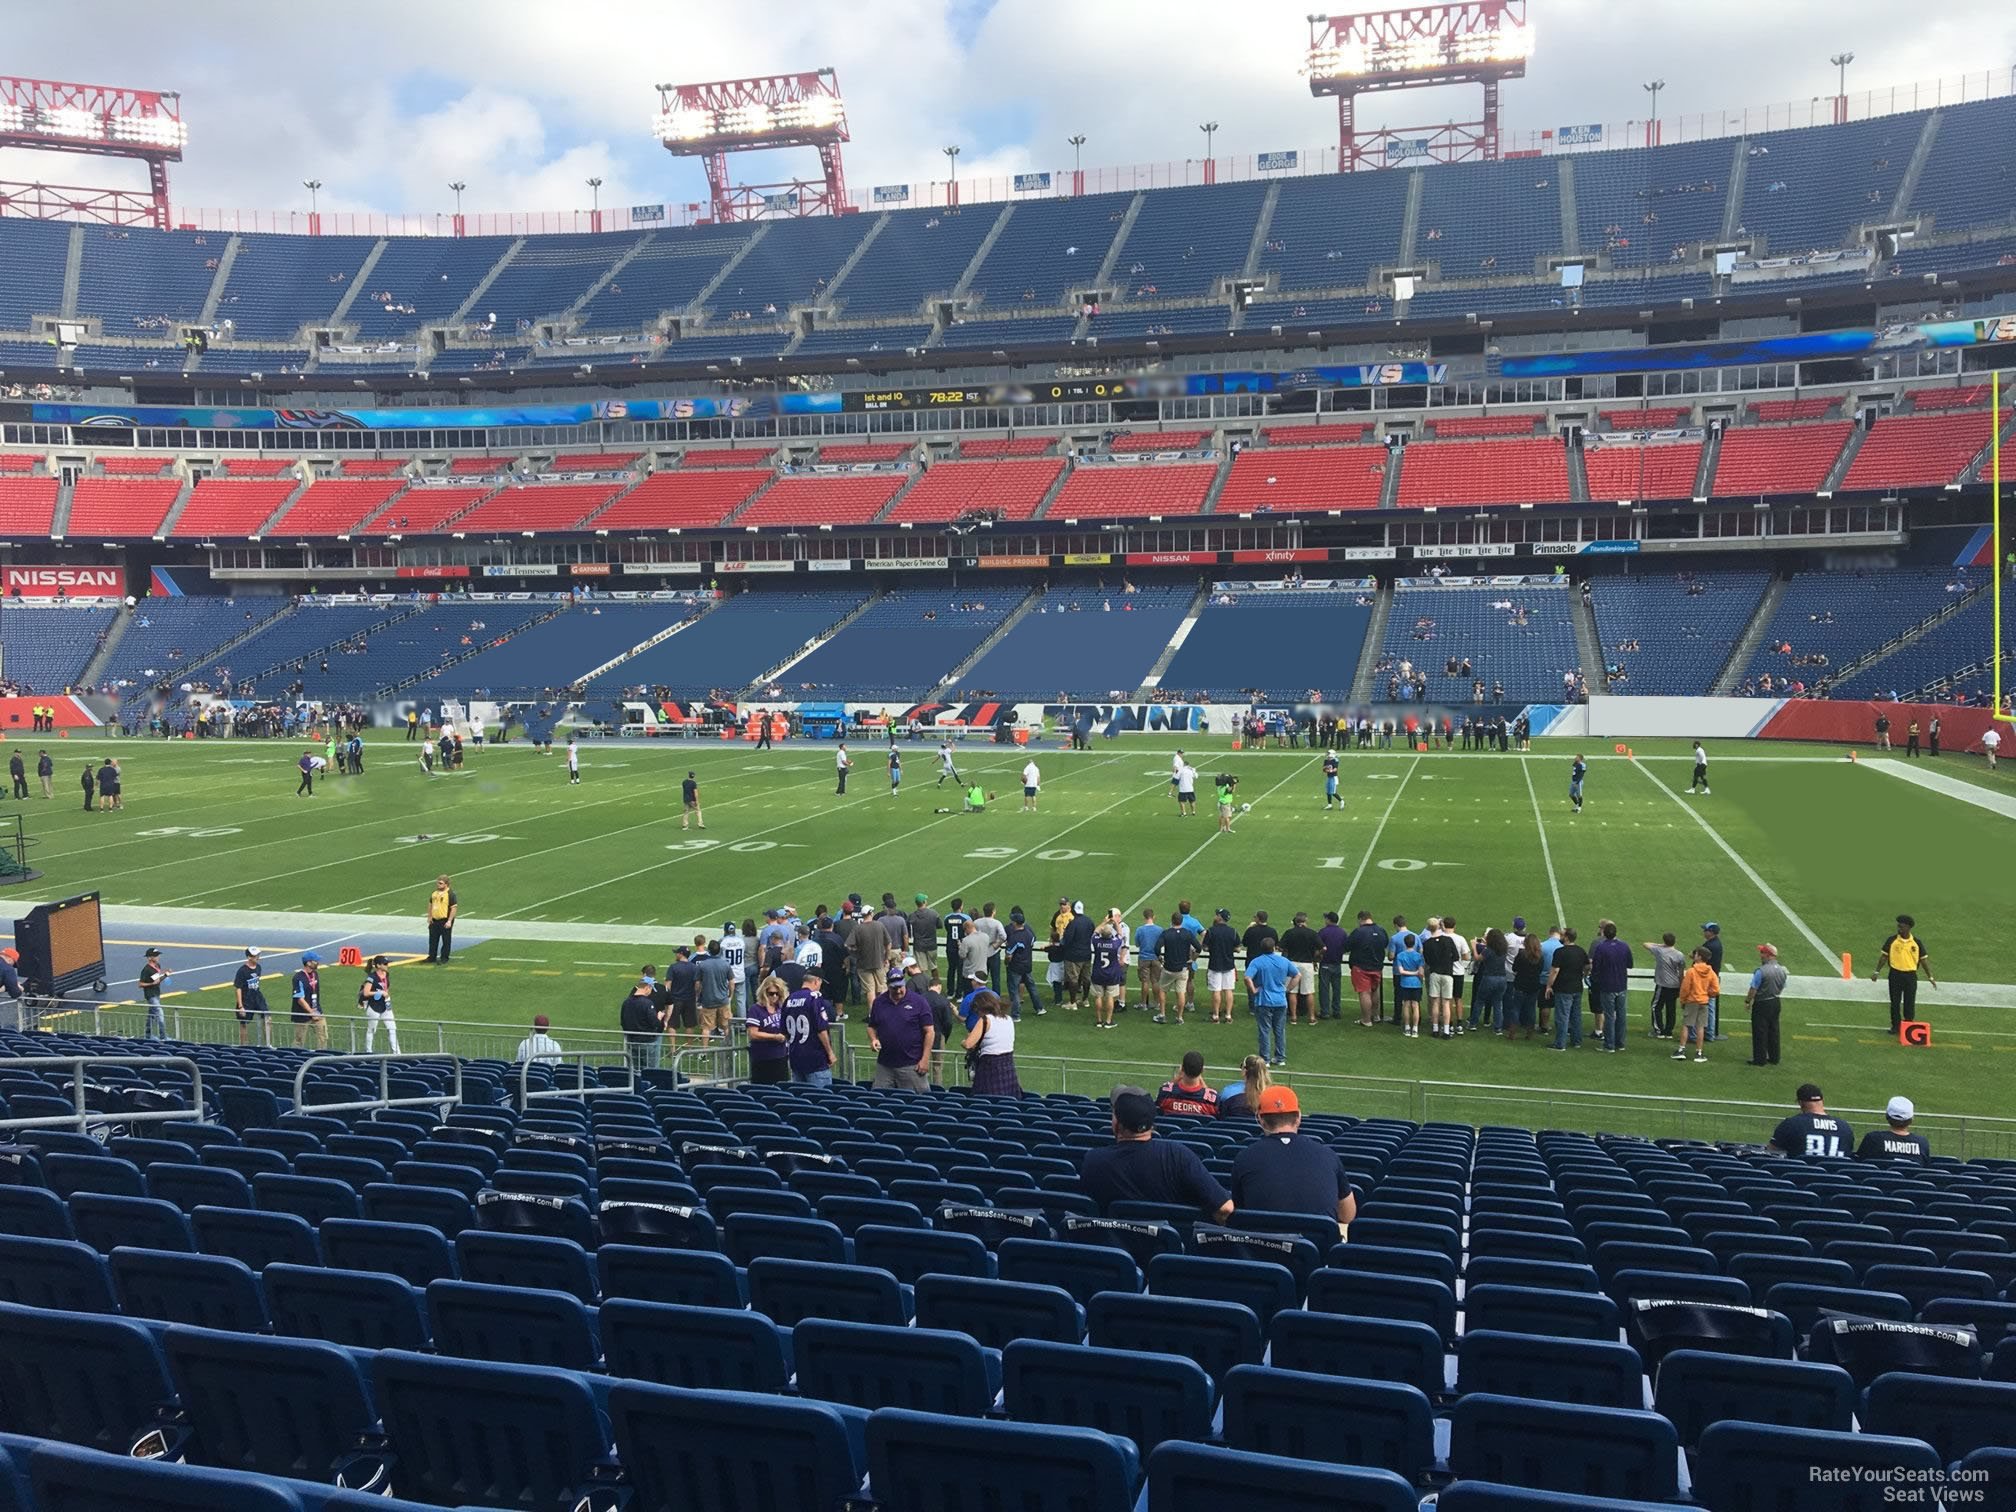 section 132, row aa seat view  for football - nissan stadium